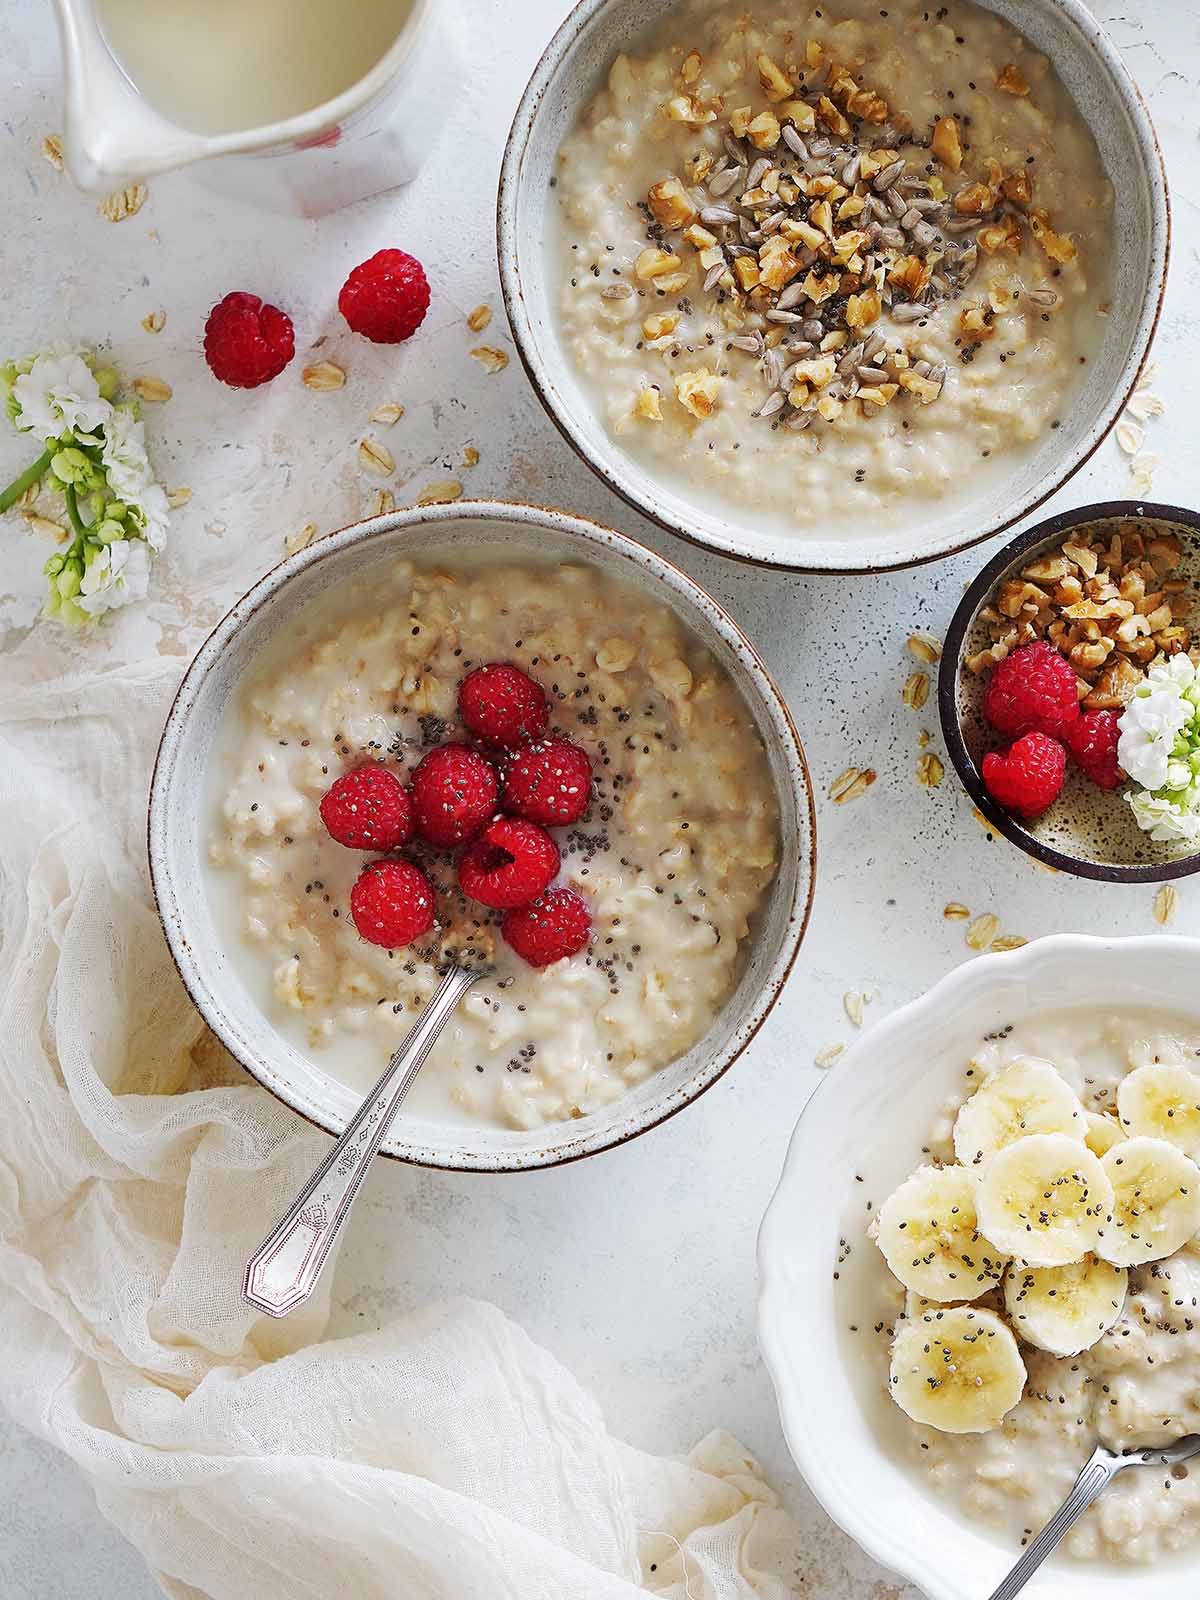 Three bowls of oatmeal topped with different fruits and nuts.